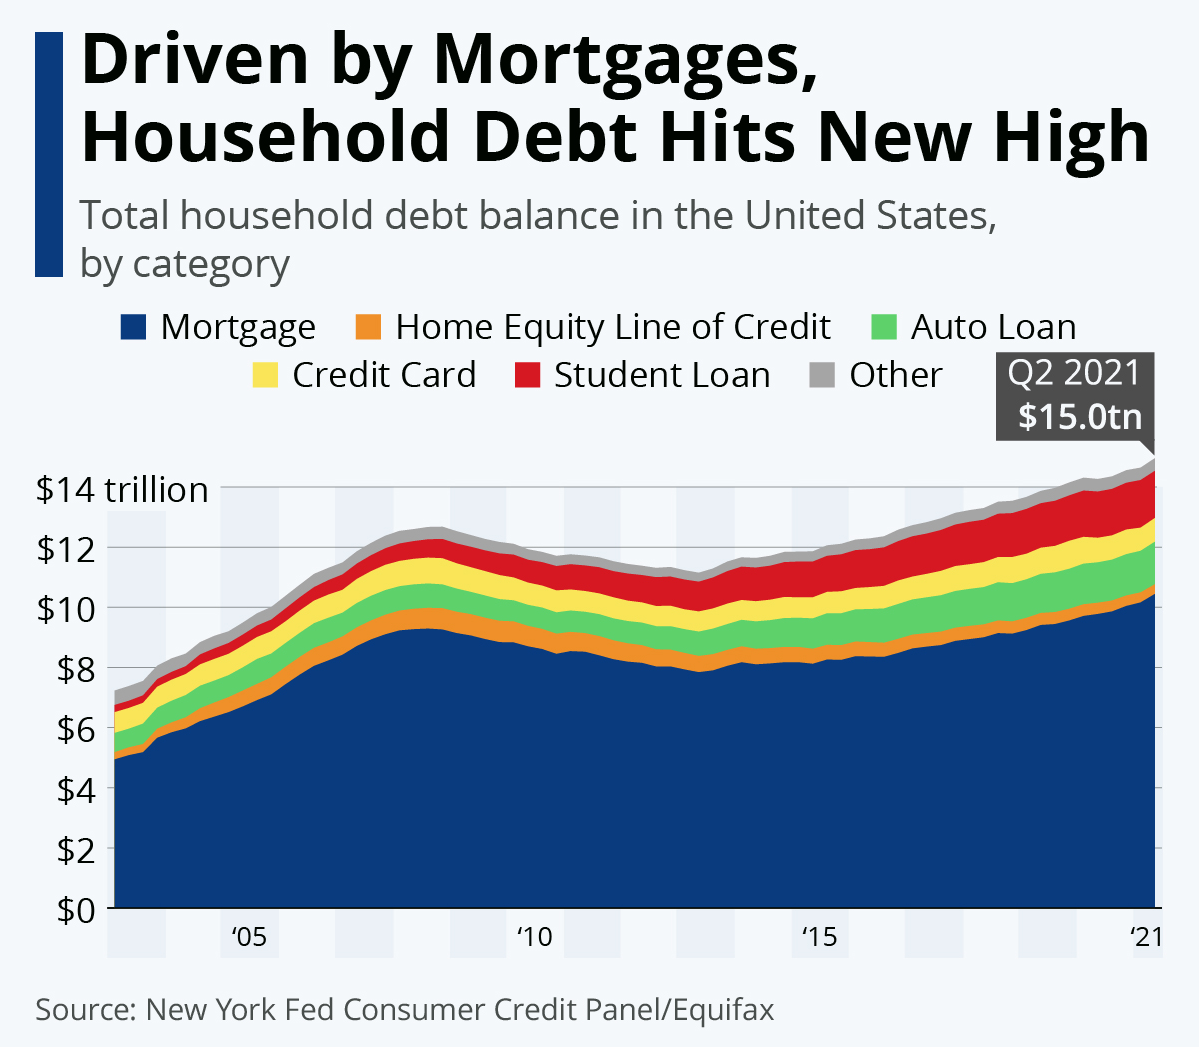 Driven by Mortgages, U.S. Household Debt Hits New High